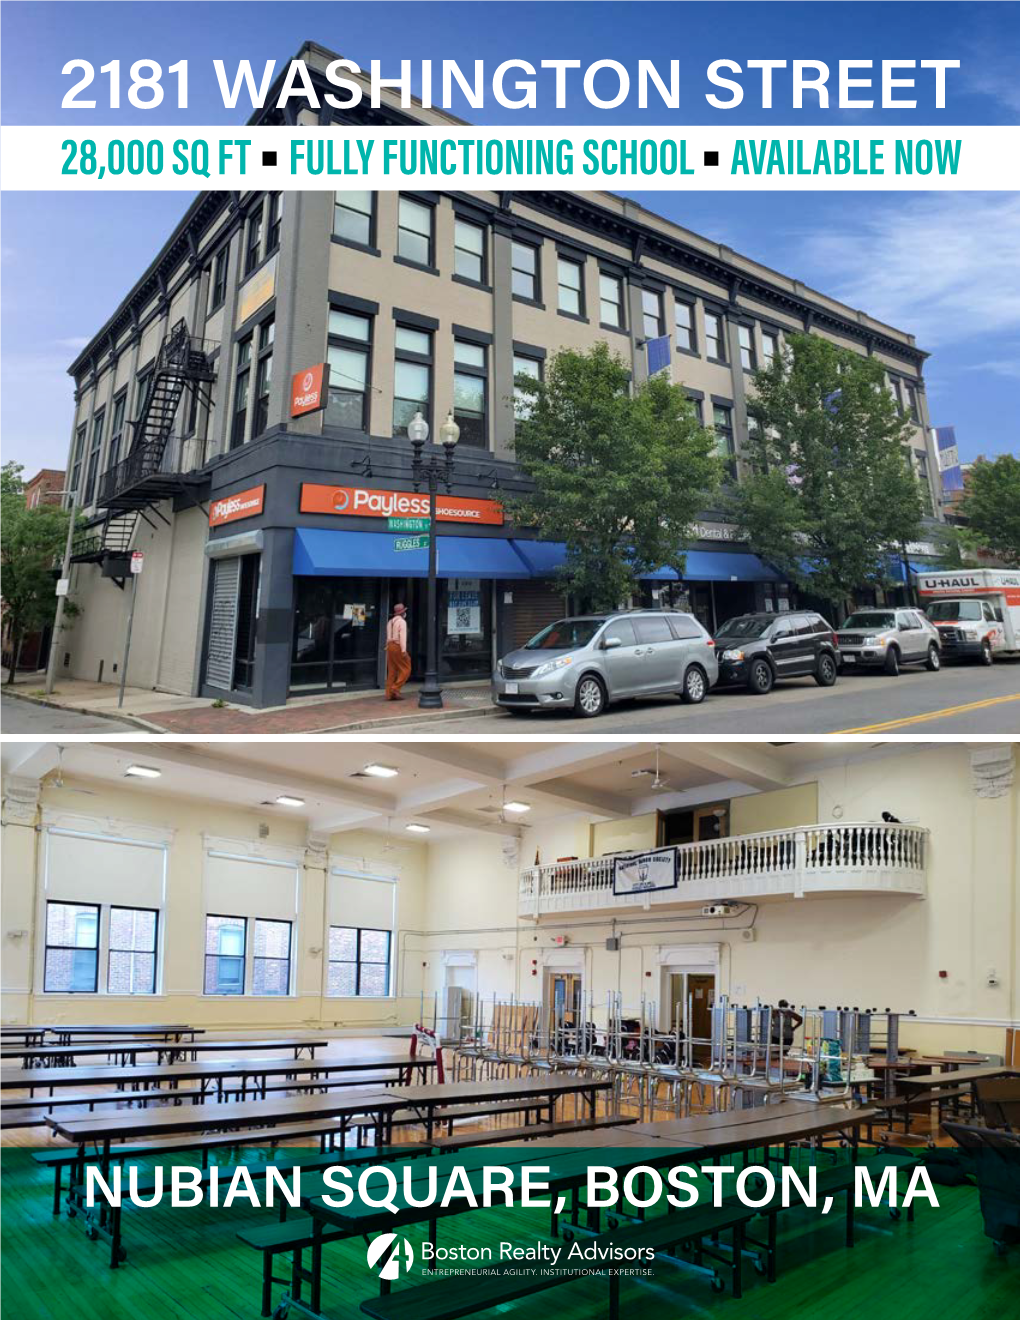 2181 Washington Street 28,000 Sq Ft ■ Fully Functioning School ■ Available Now